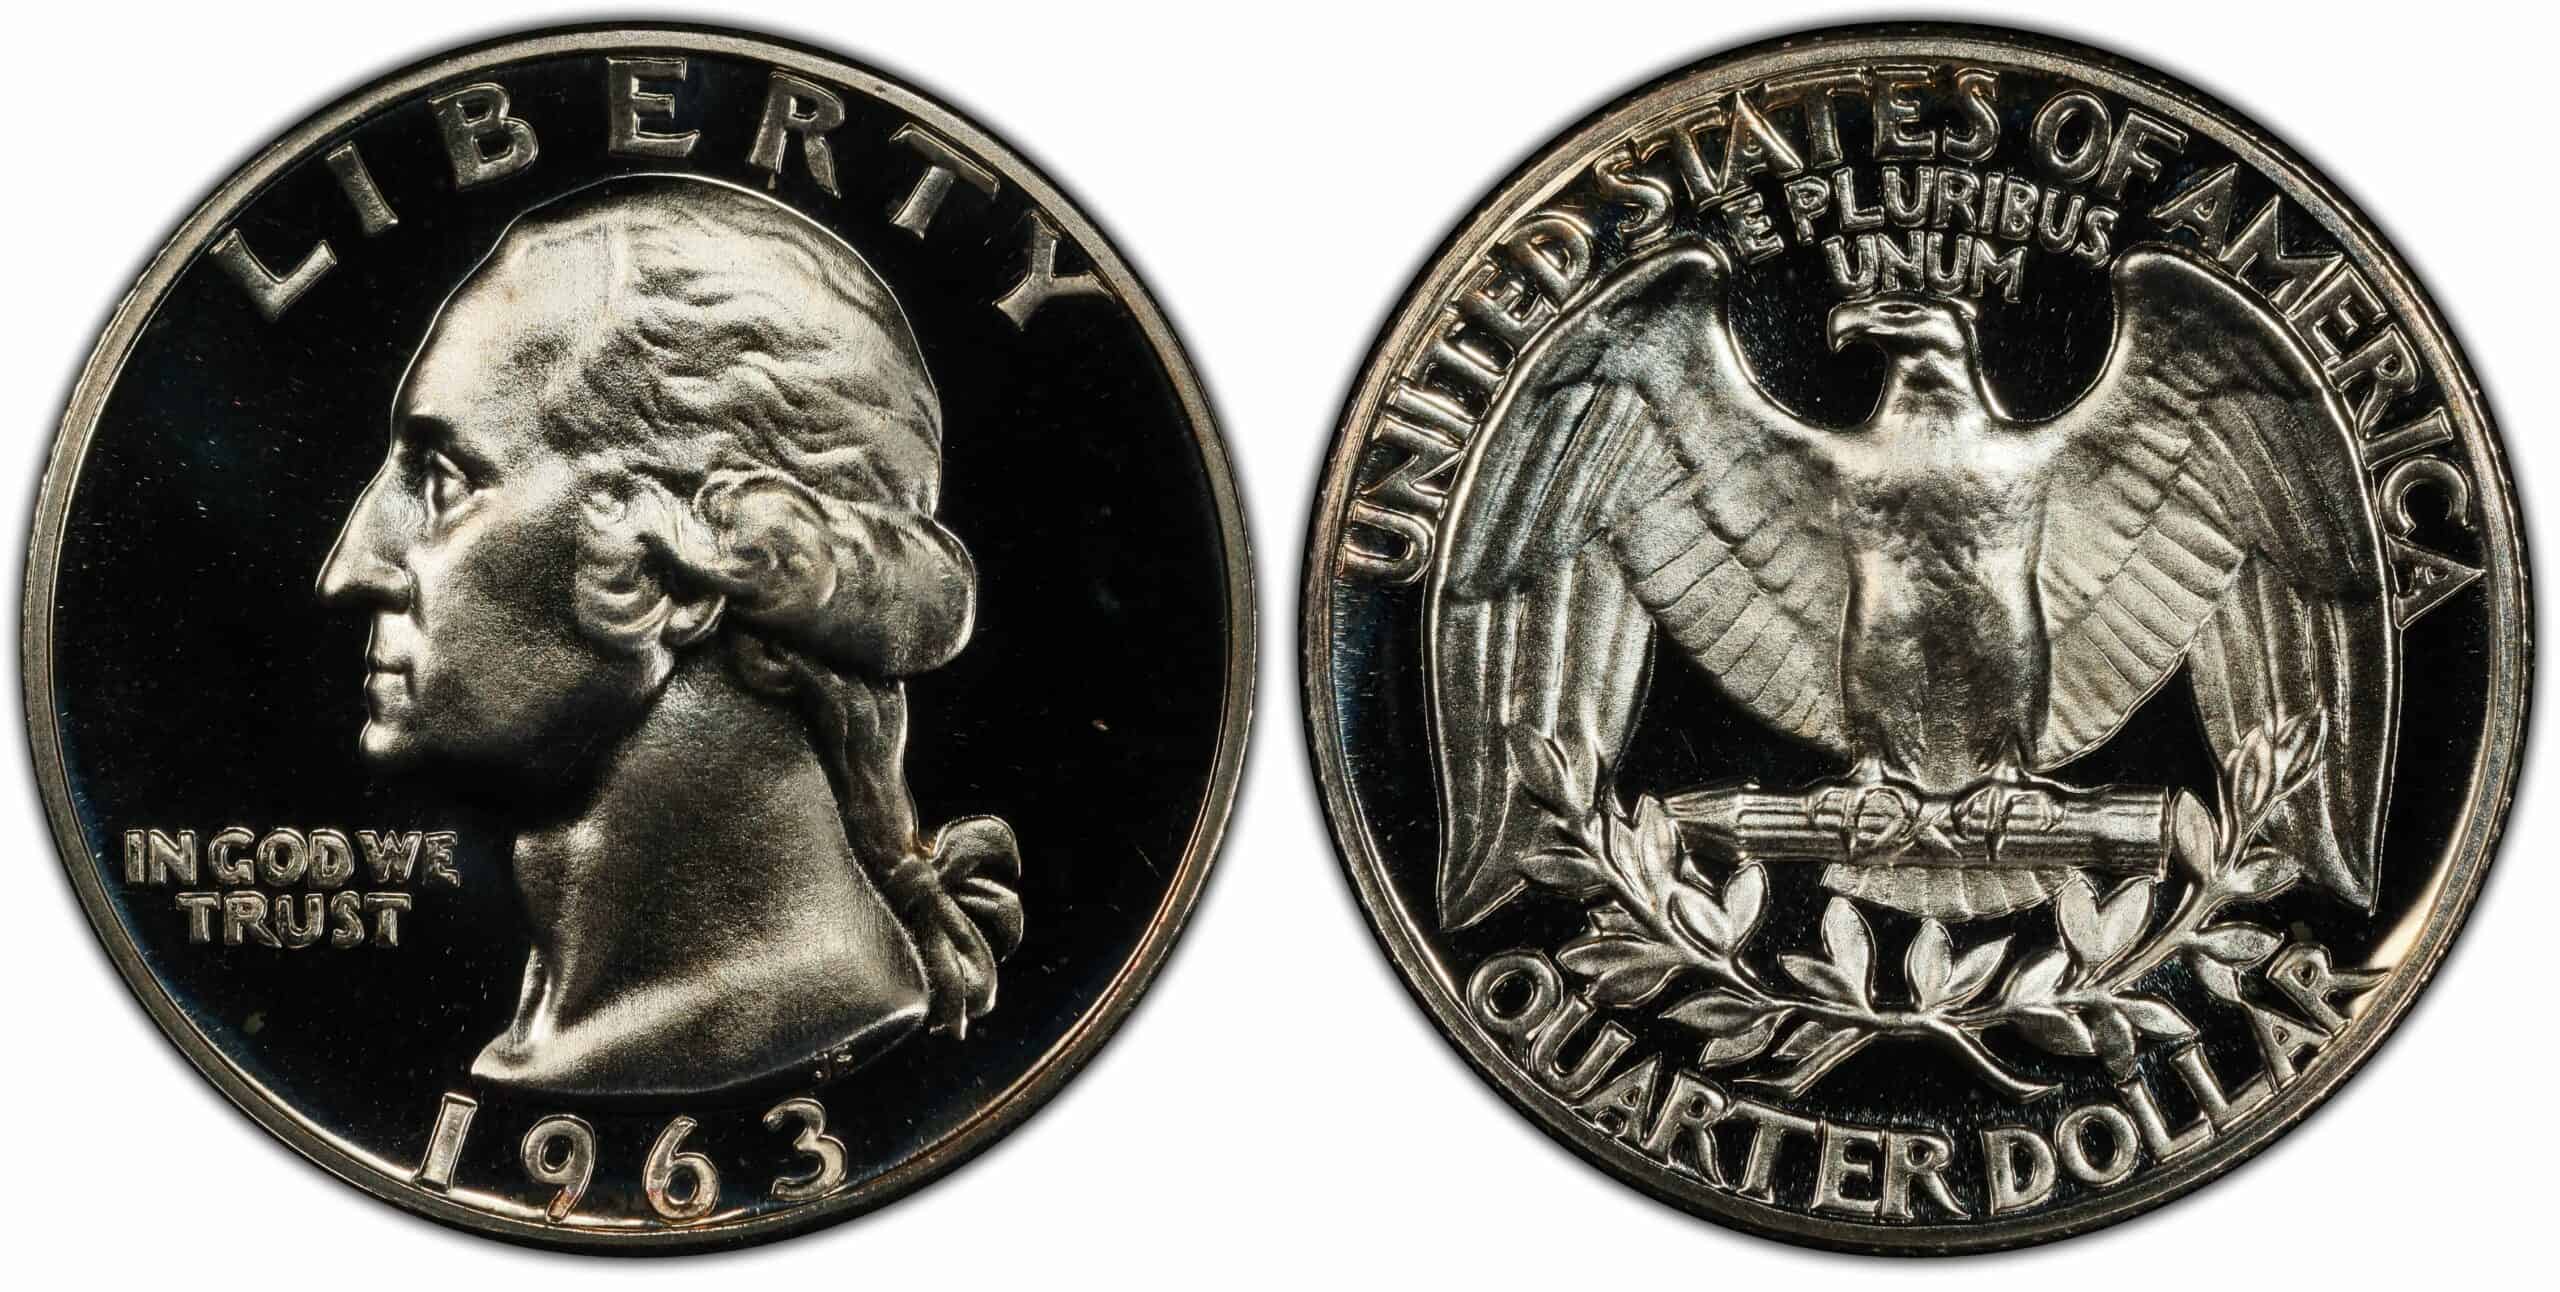 History of the 1963 Quarter